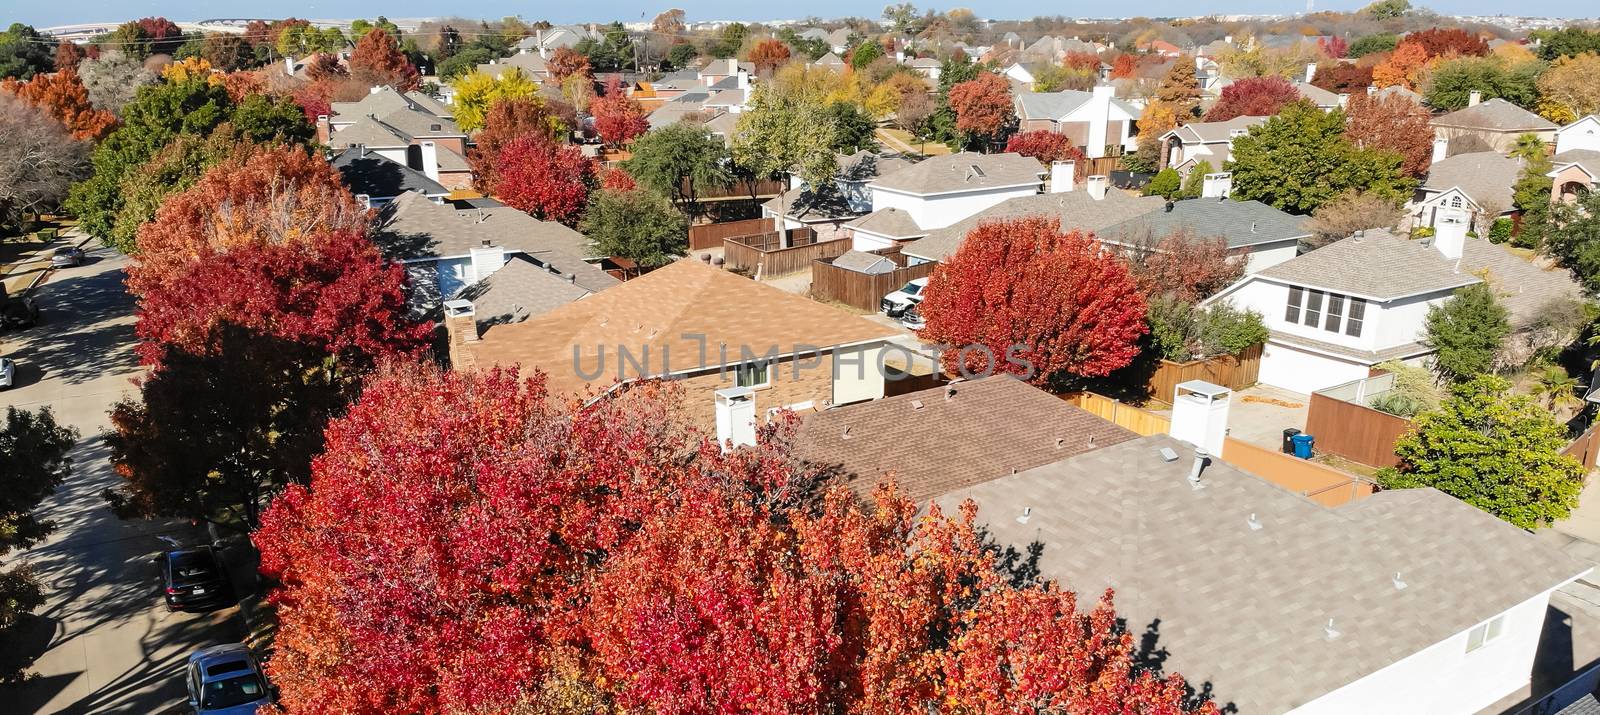 Panorama close-up aerial view roof of typical single-family house with colorful autumn leaves. Bright red tree along local drive street with sidewalk pathway